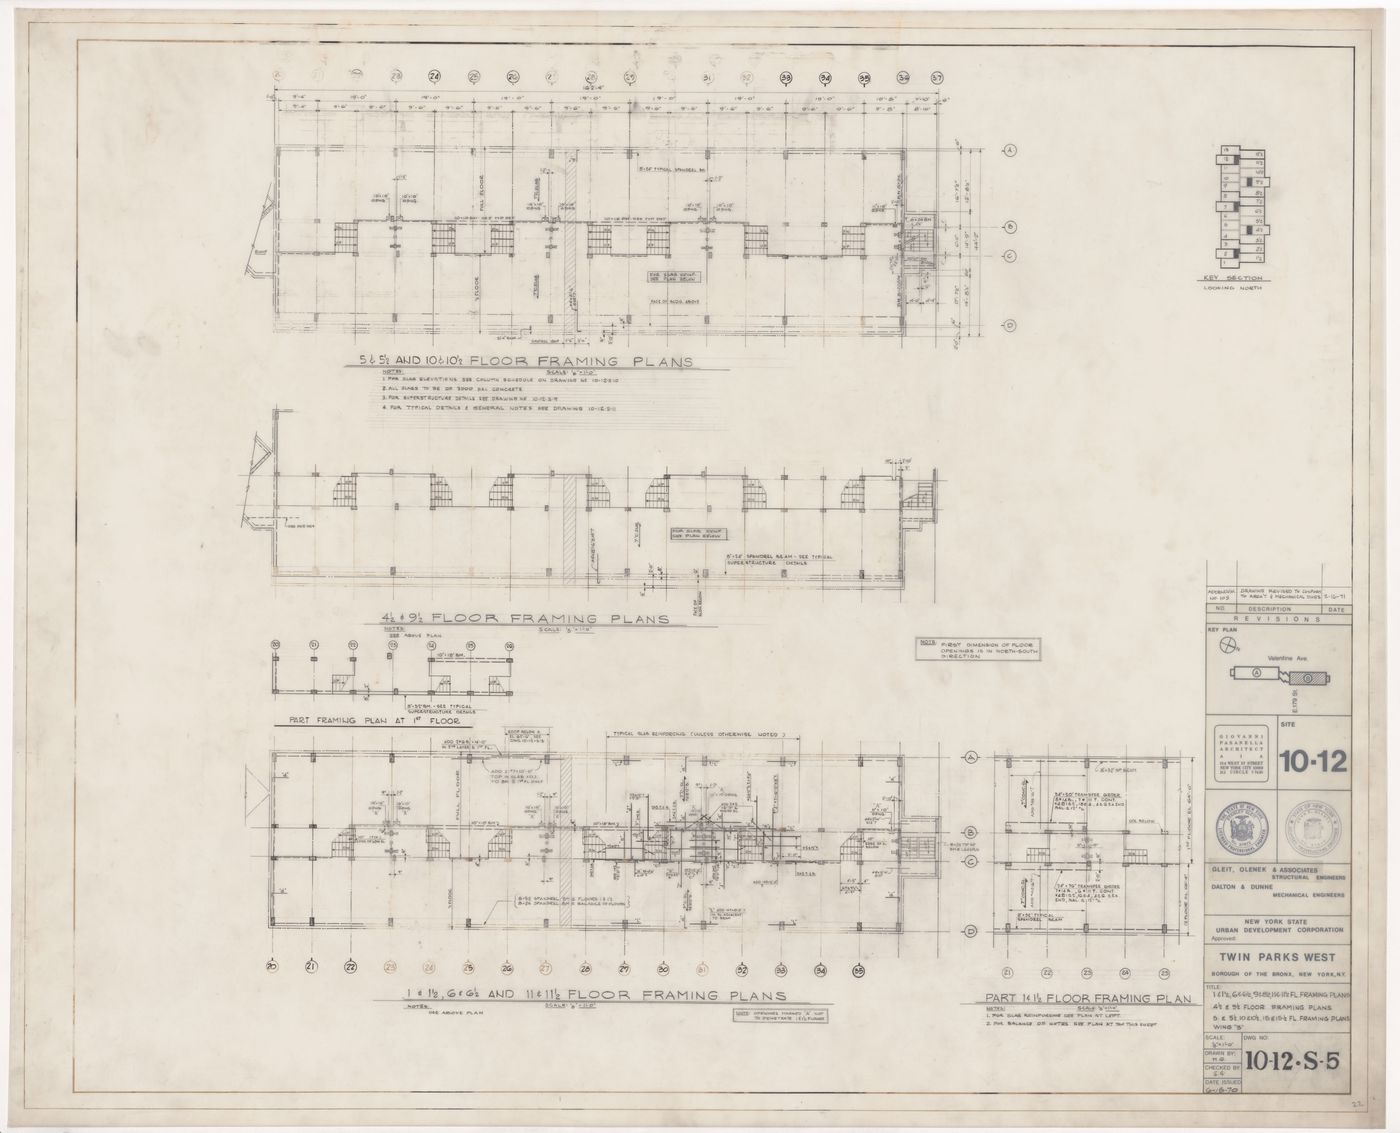 Framing plans for Twin Parks West, Site 10-12, Bronx, New York